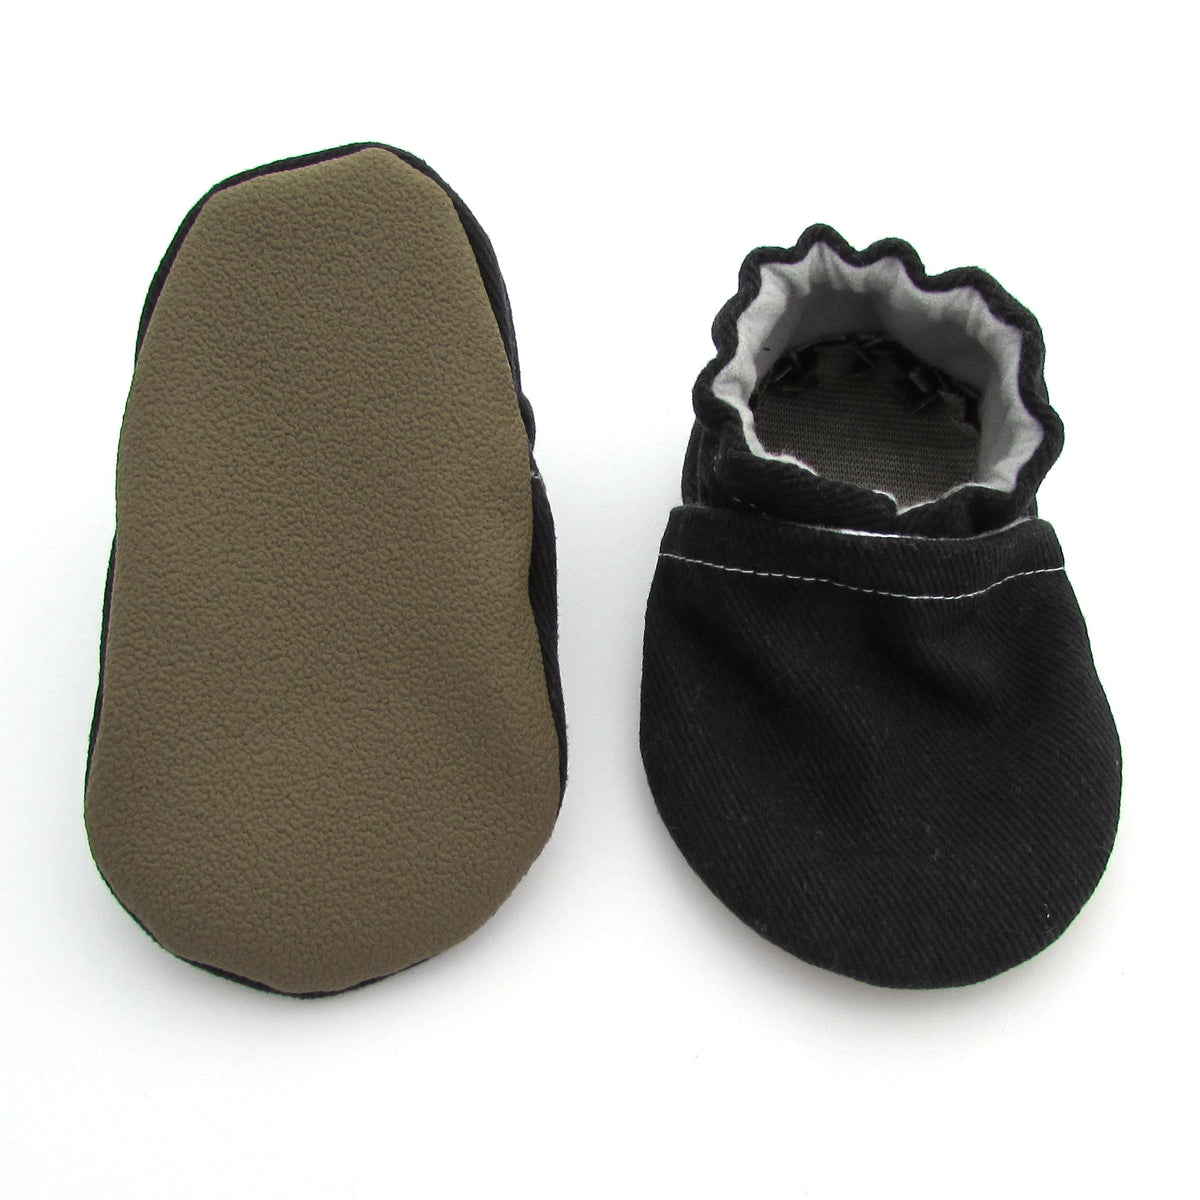 Soft Sole Vegan Shoes & Slippers for Babies 0-2 years